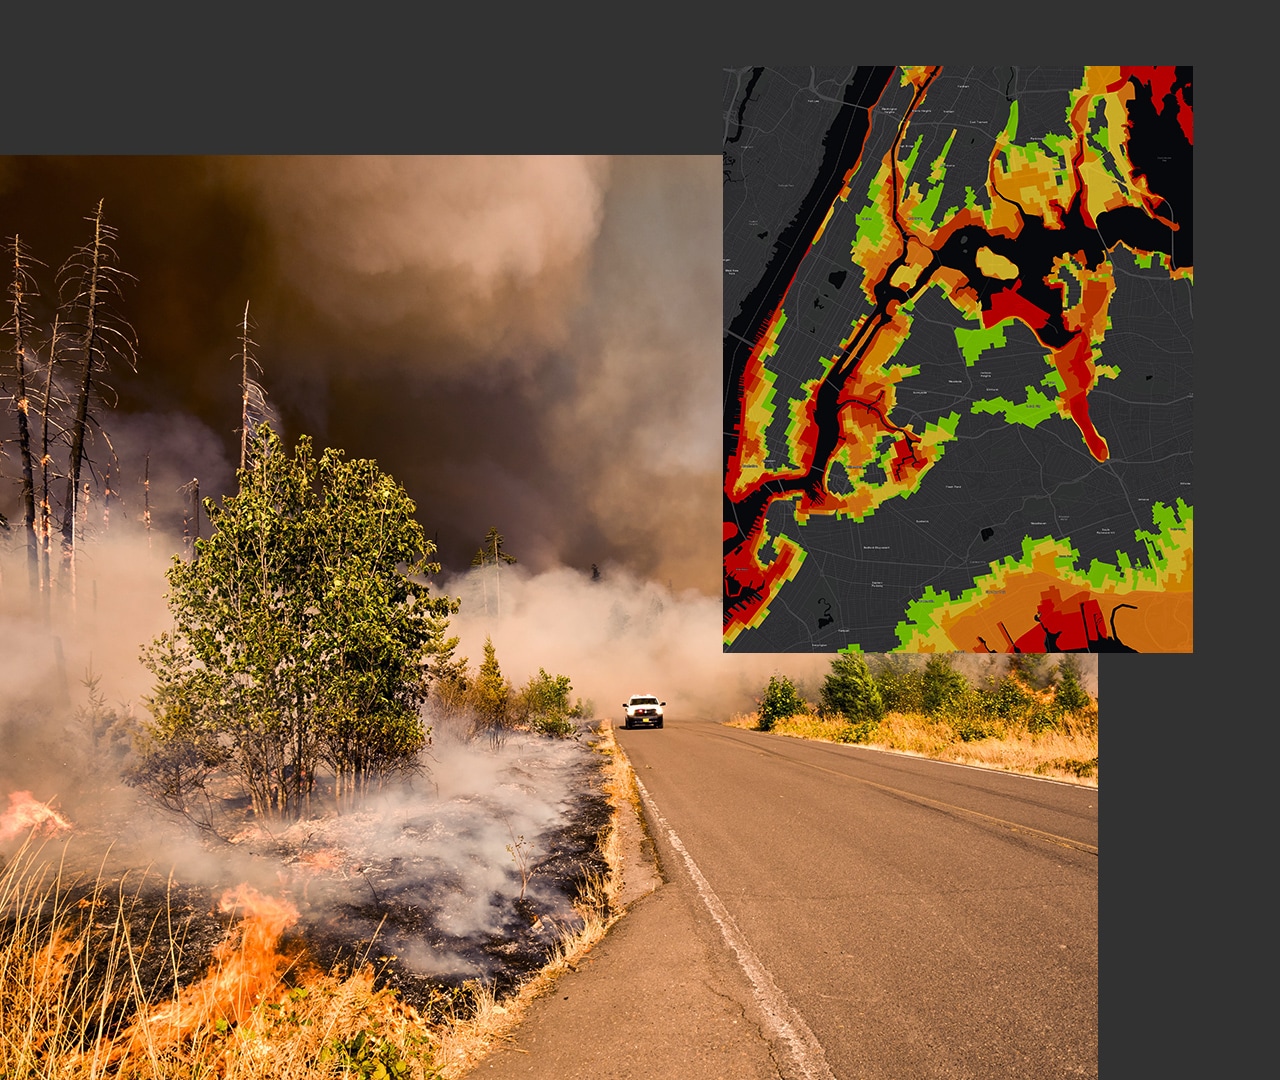 A wildfire in a forest with a white emergency vehicle on the through road next to an inset image of a gray digital map